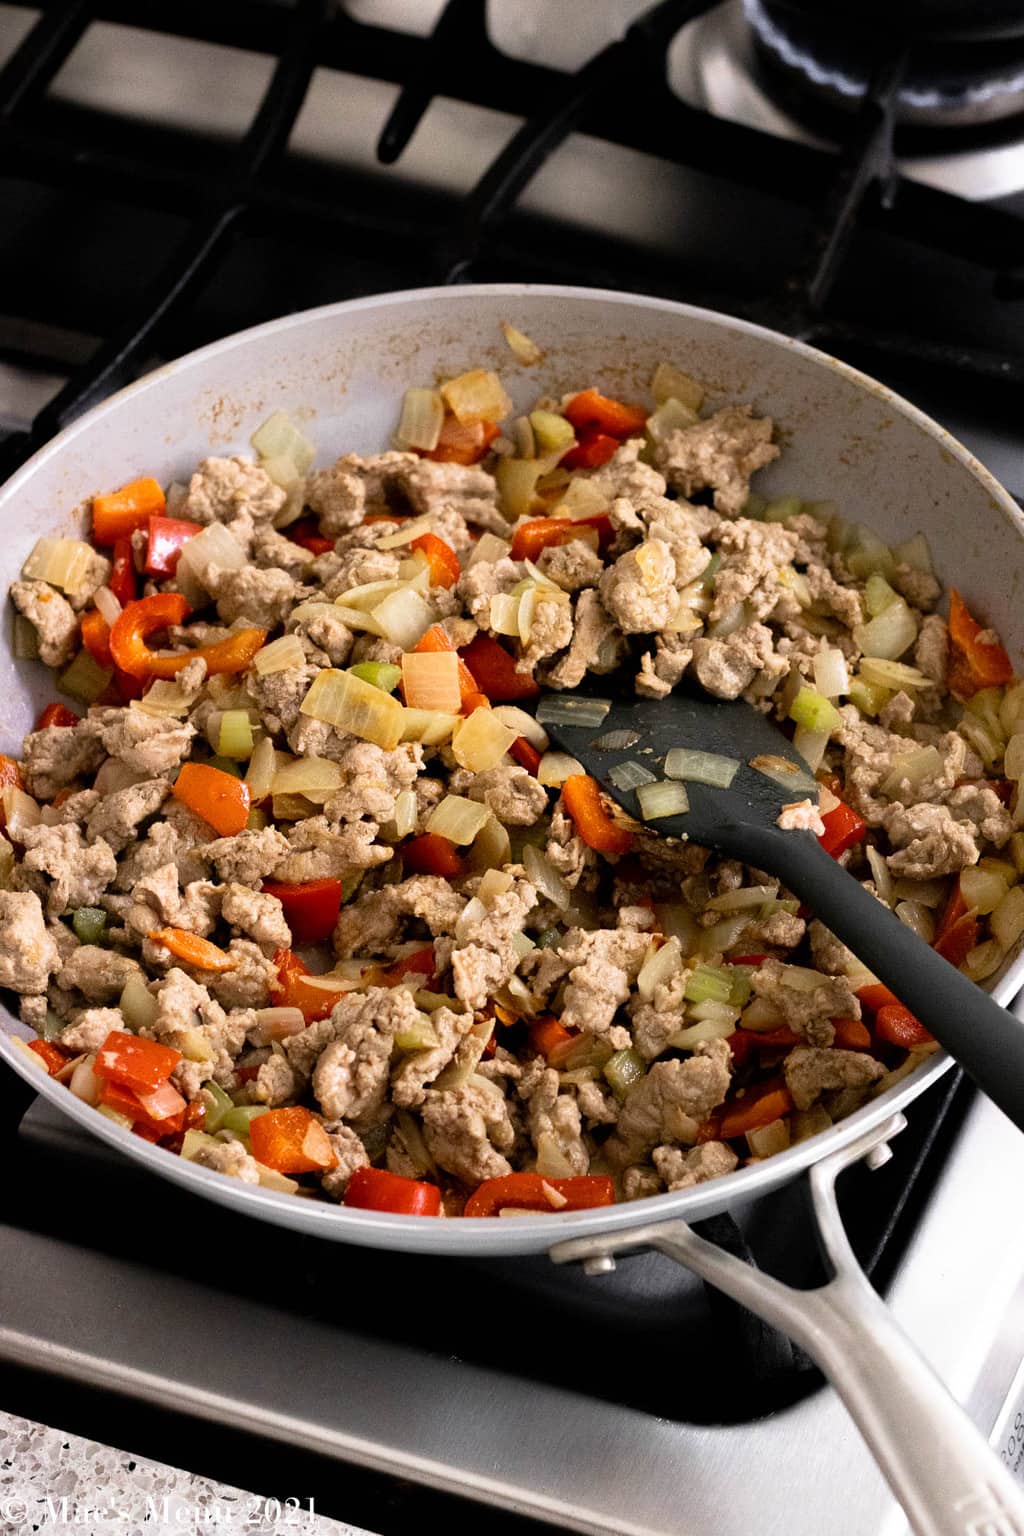 A saute pan of cooked and crumbled ground turkey, onions, celery, and red pepper.